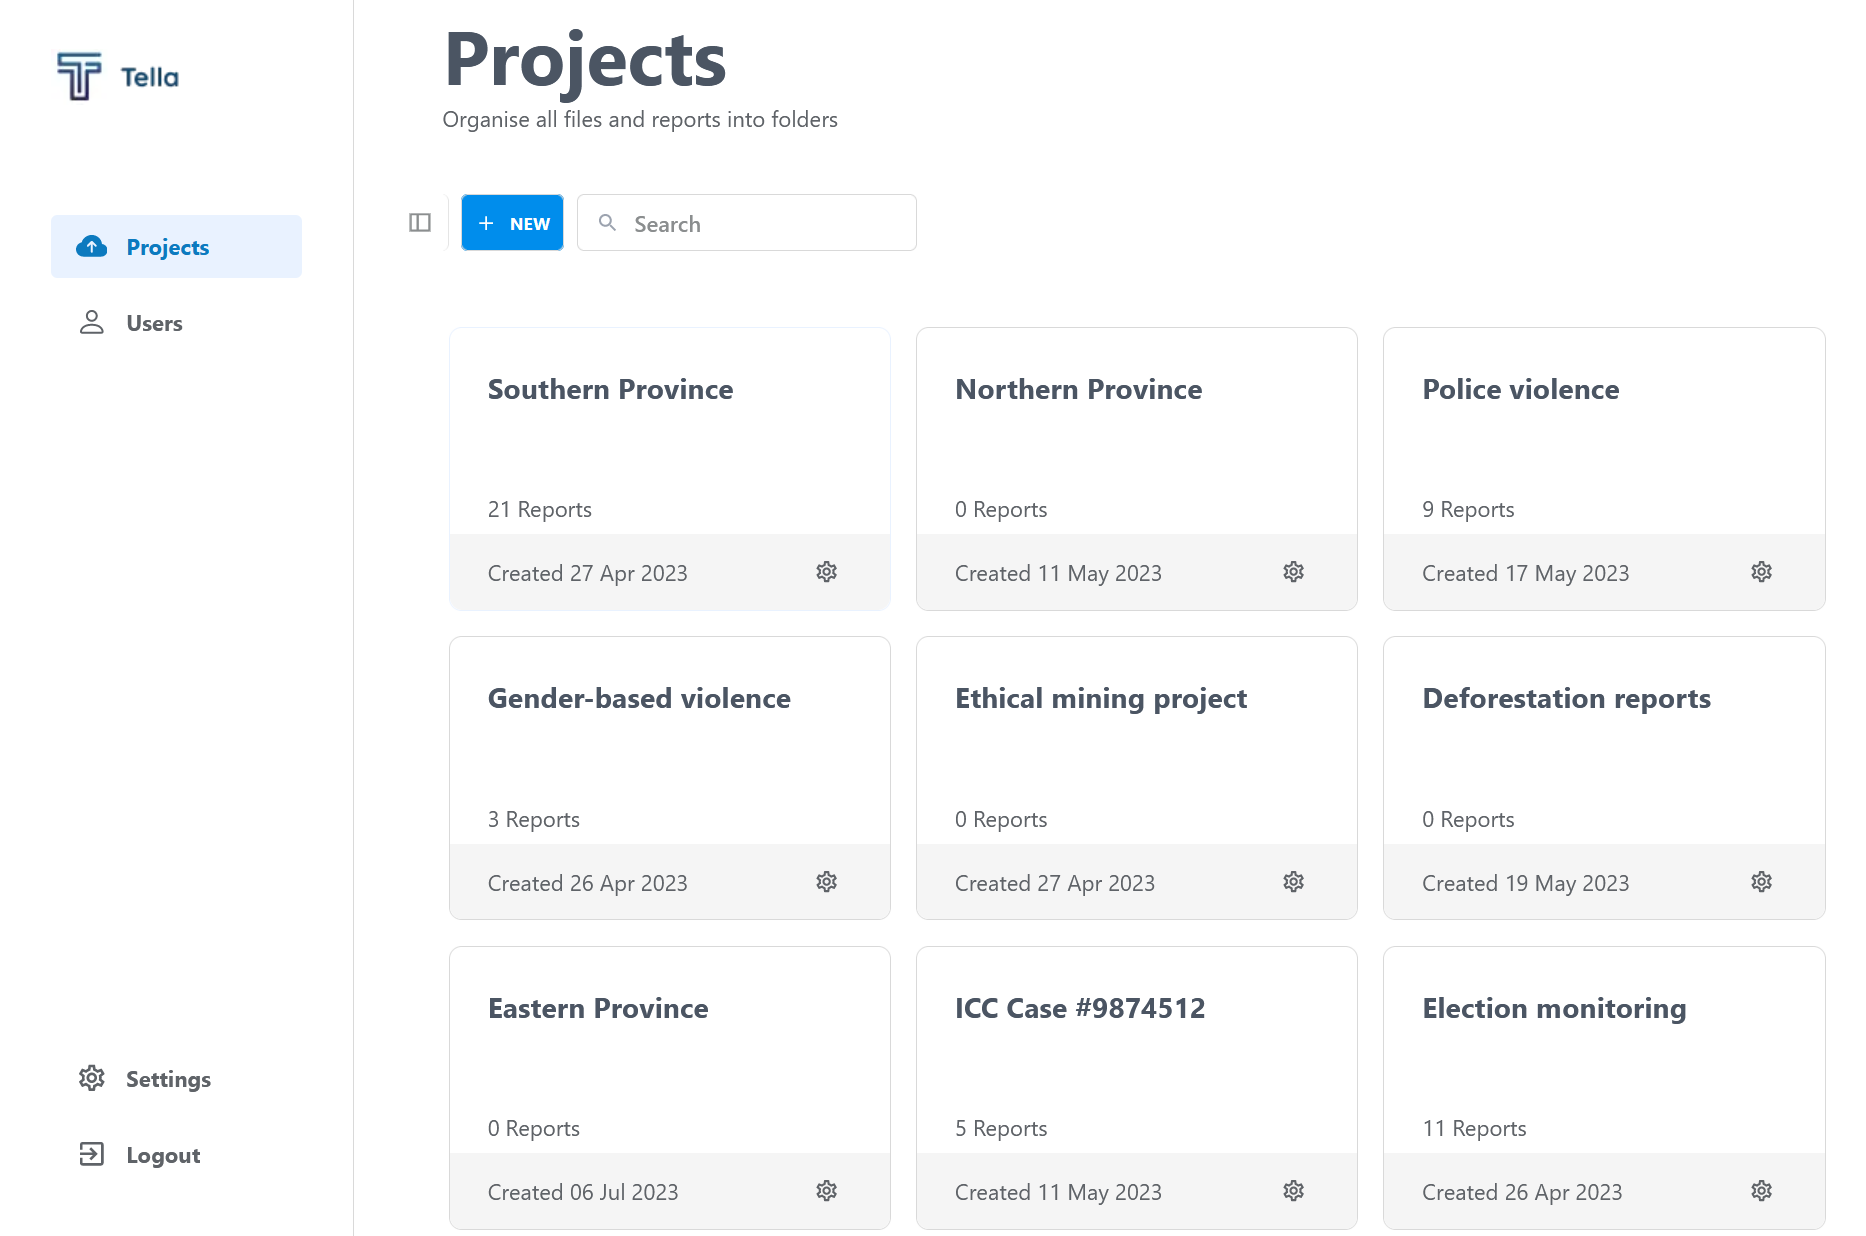 Screenshot of the homescreen of Tella Web, displaying the list of "projects" an organization may be managing.